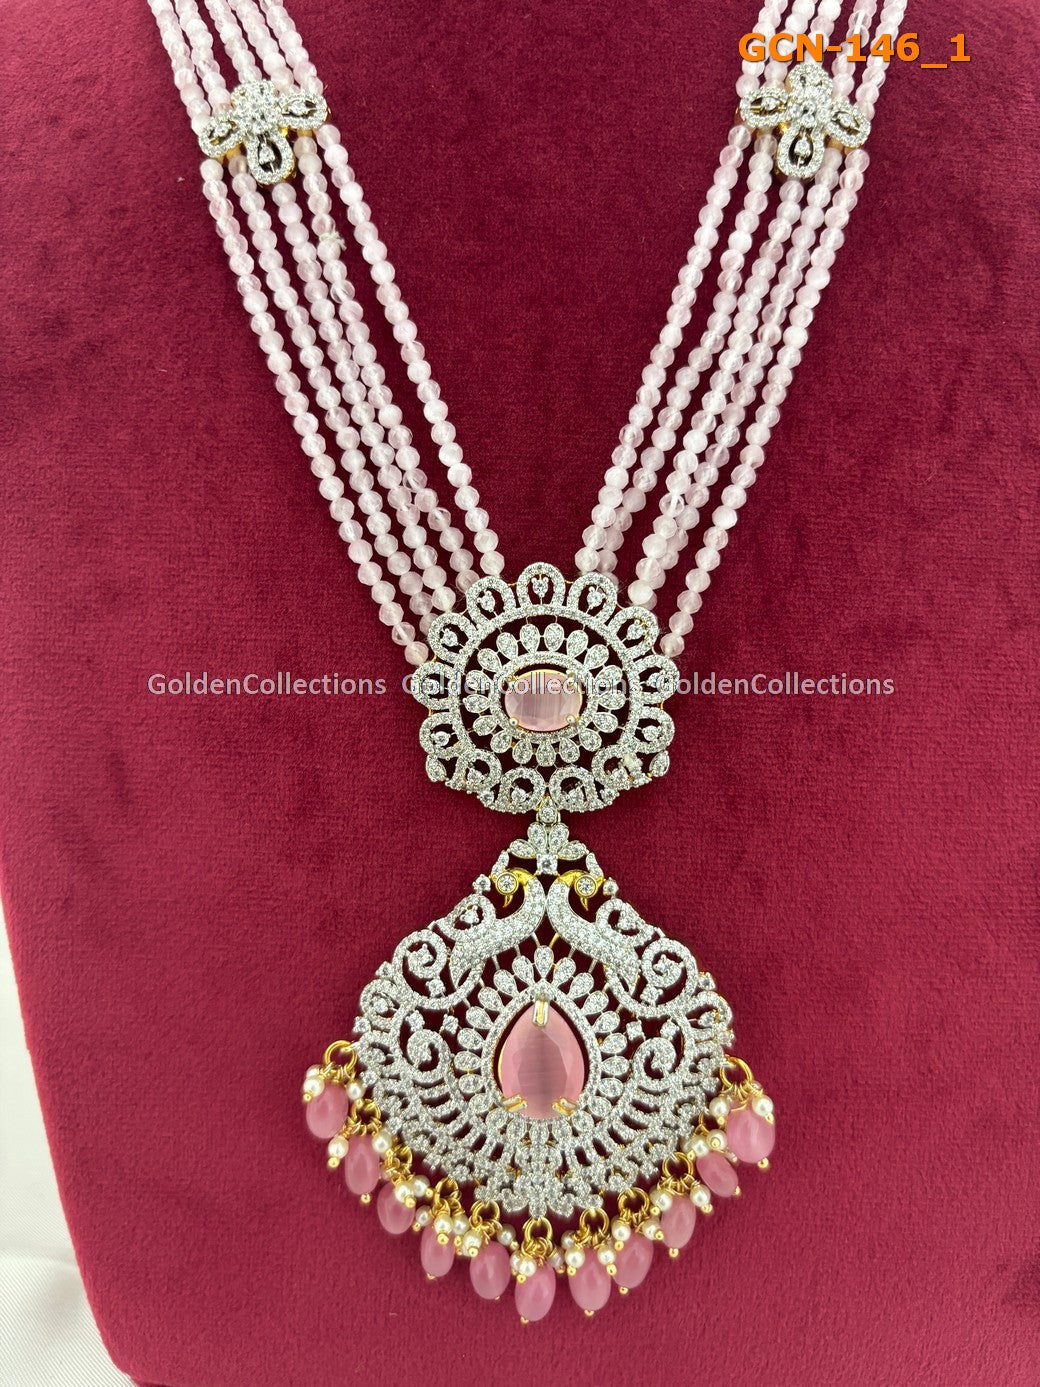 Pink Necklace : Pearl Beaded Necklace - GoldenCollections  GoldenCollections 2